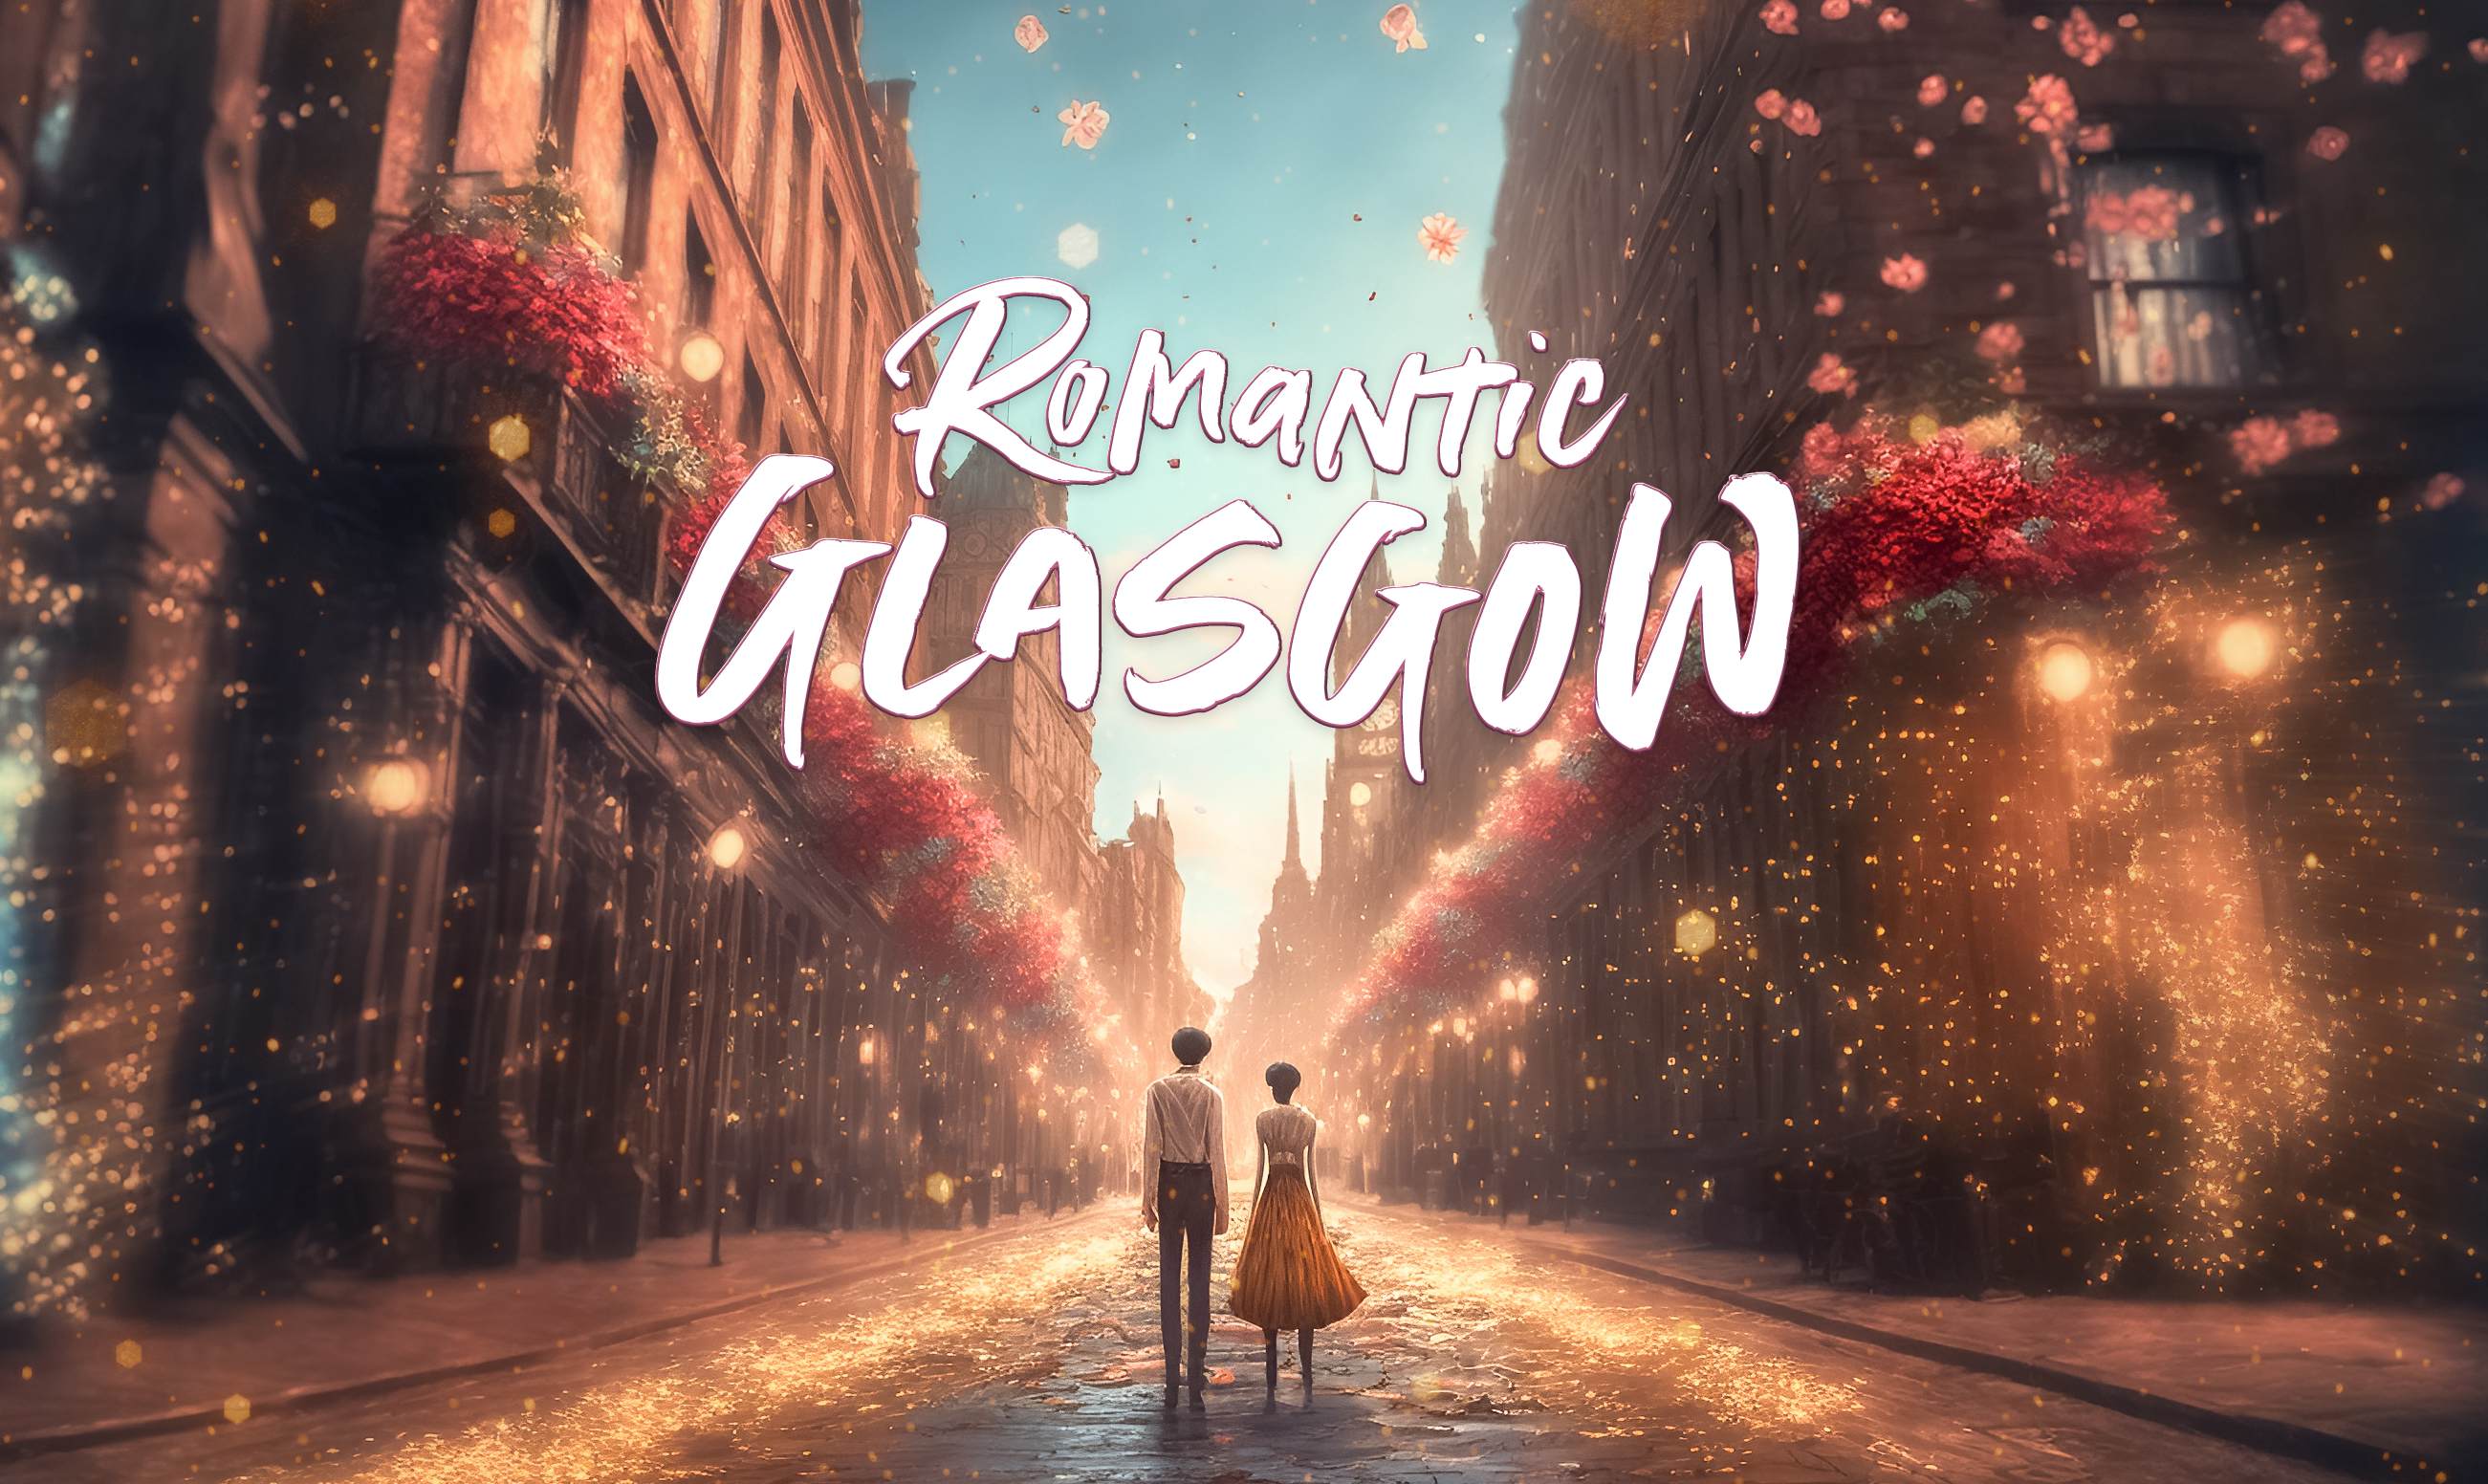 Romantic Glasgow: The Last First Date image